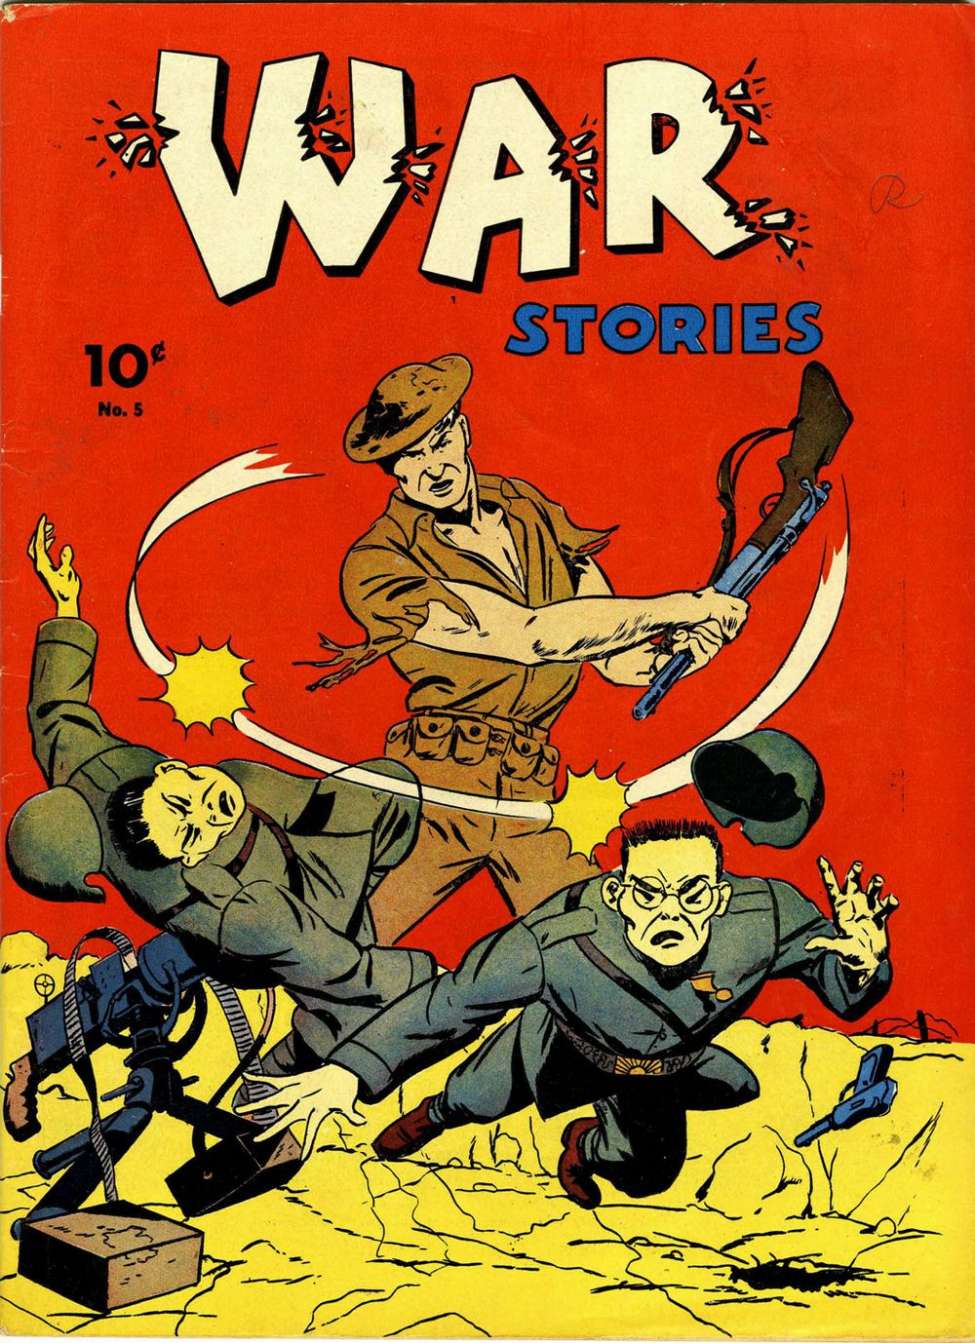 Book Cover For War Stories 5